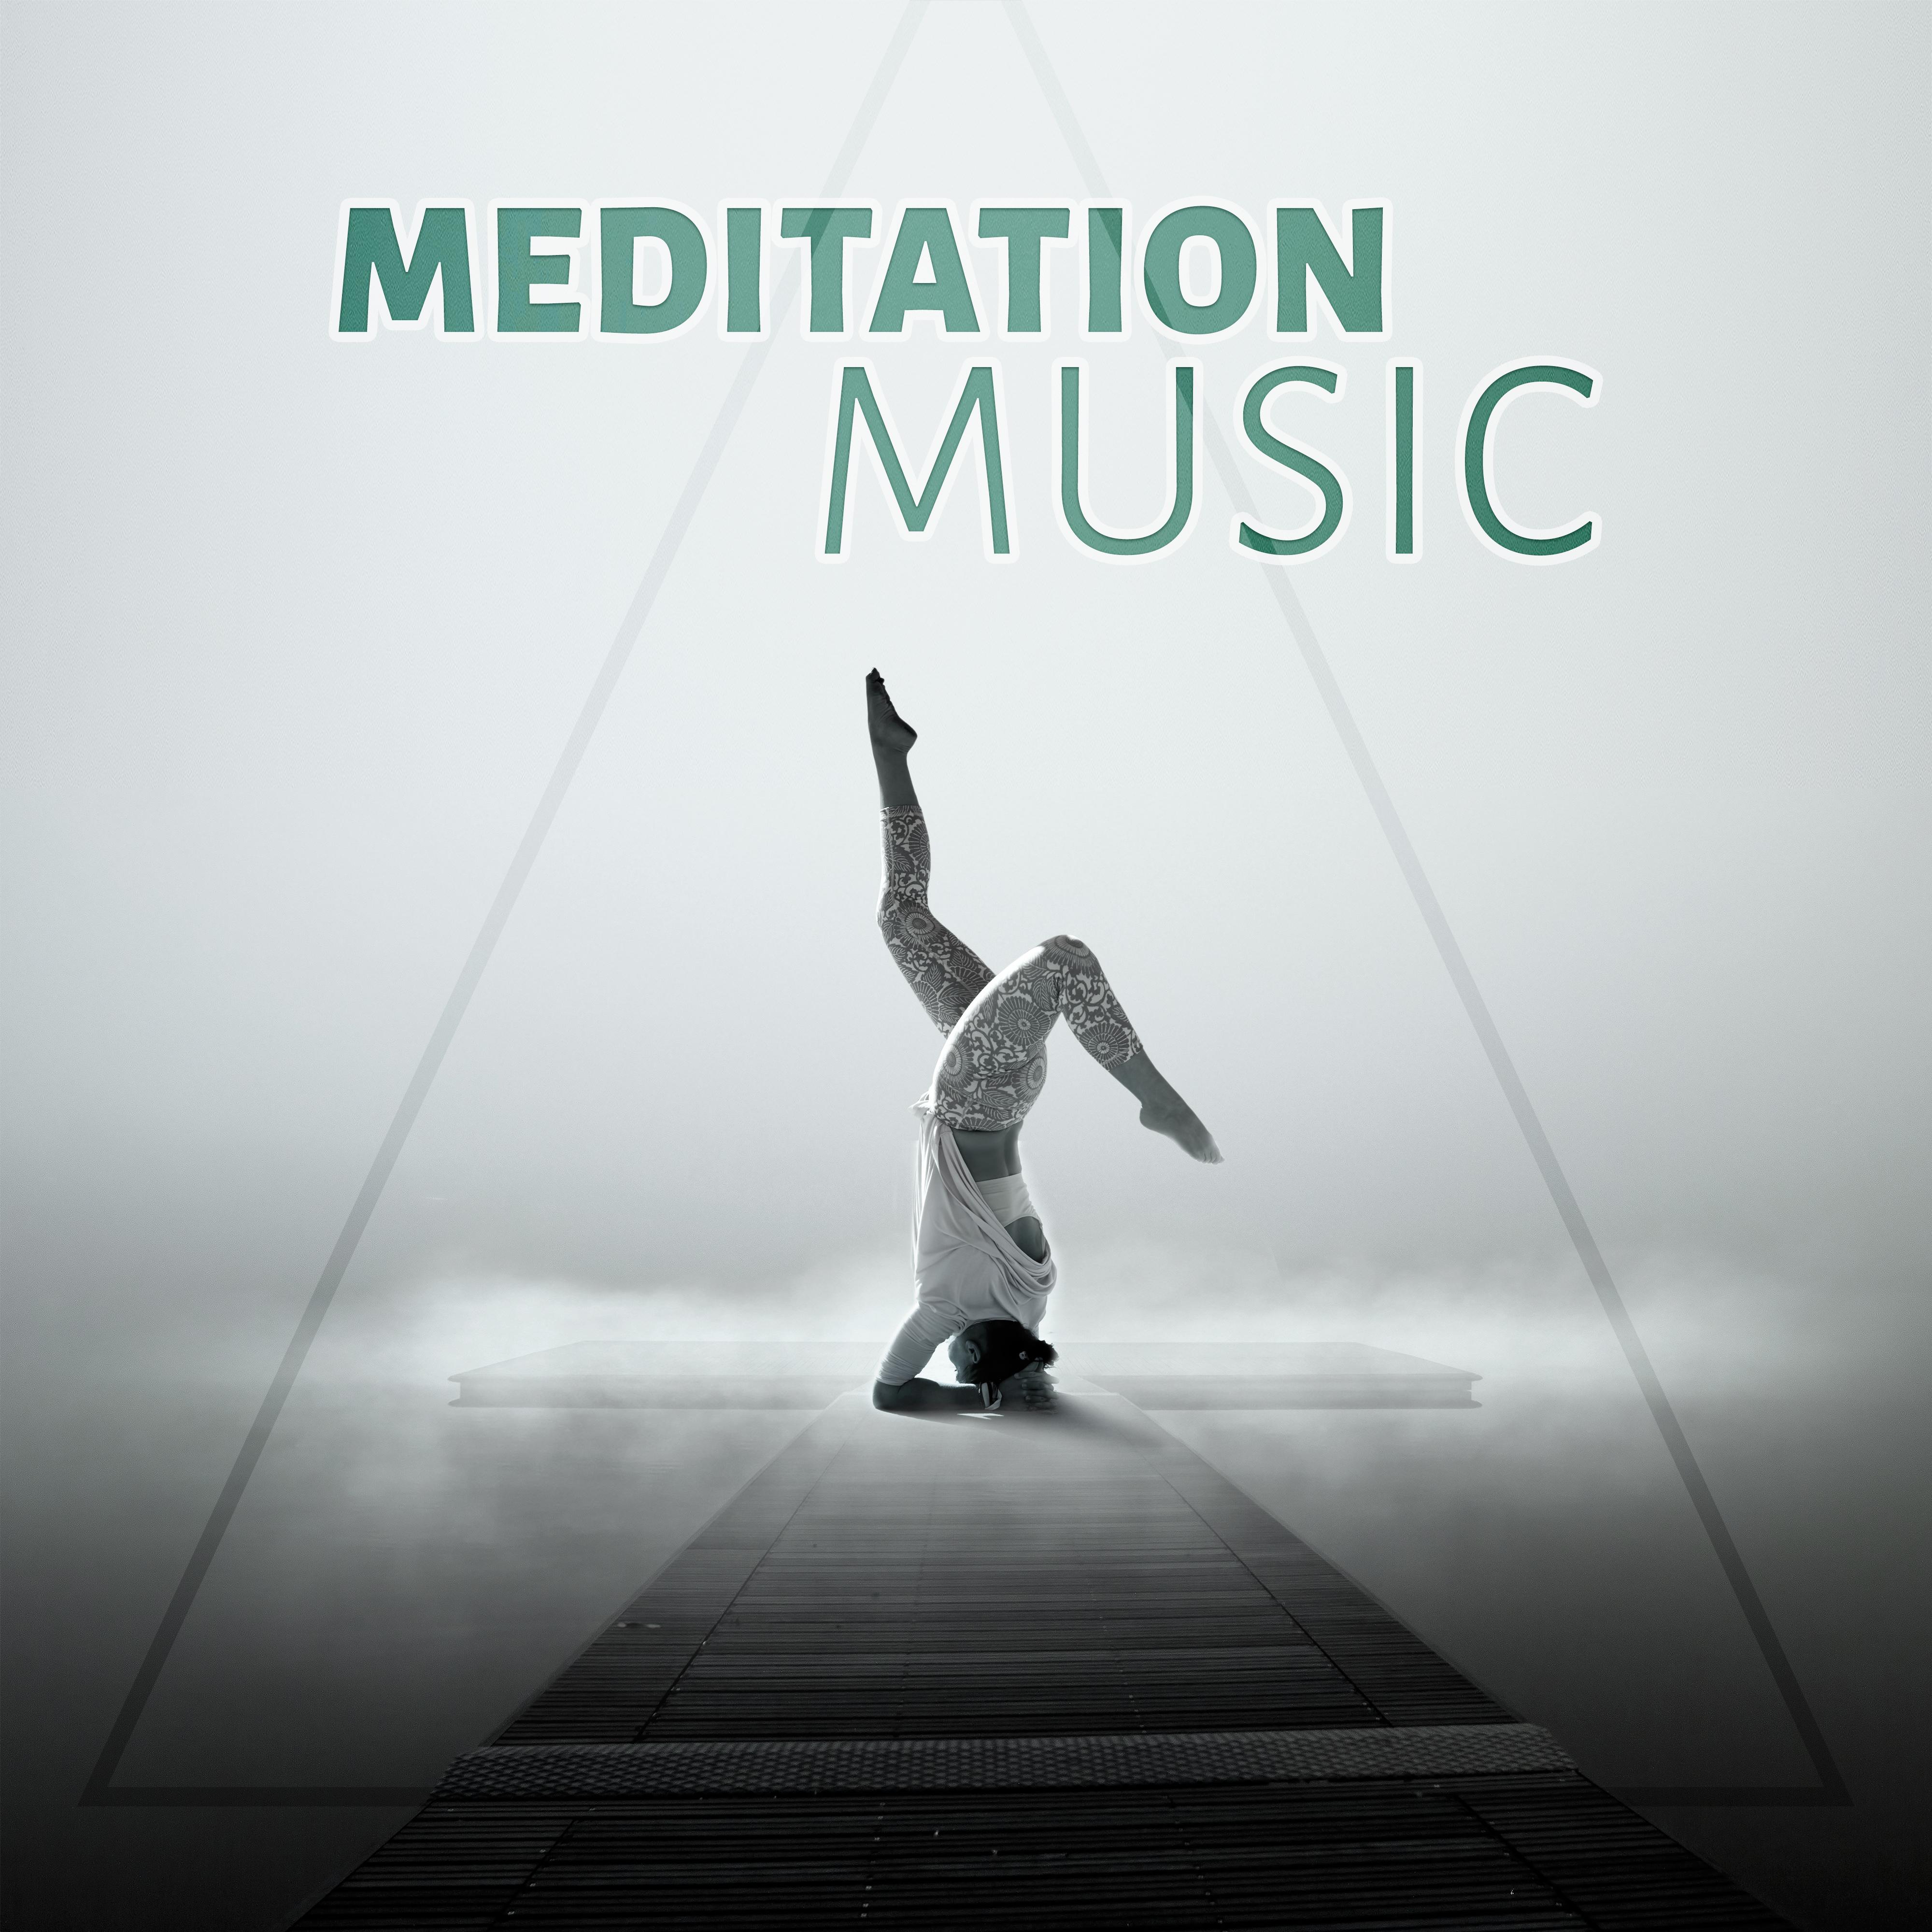 Meditation Music - Music for Healing Through Sound and Touch, Time to Spa Music Background for Wellness, Massage Therapy, Mindfulness Meditation, Ocean Waves